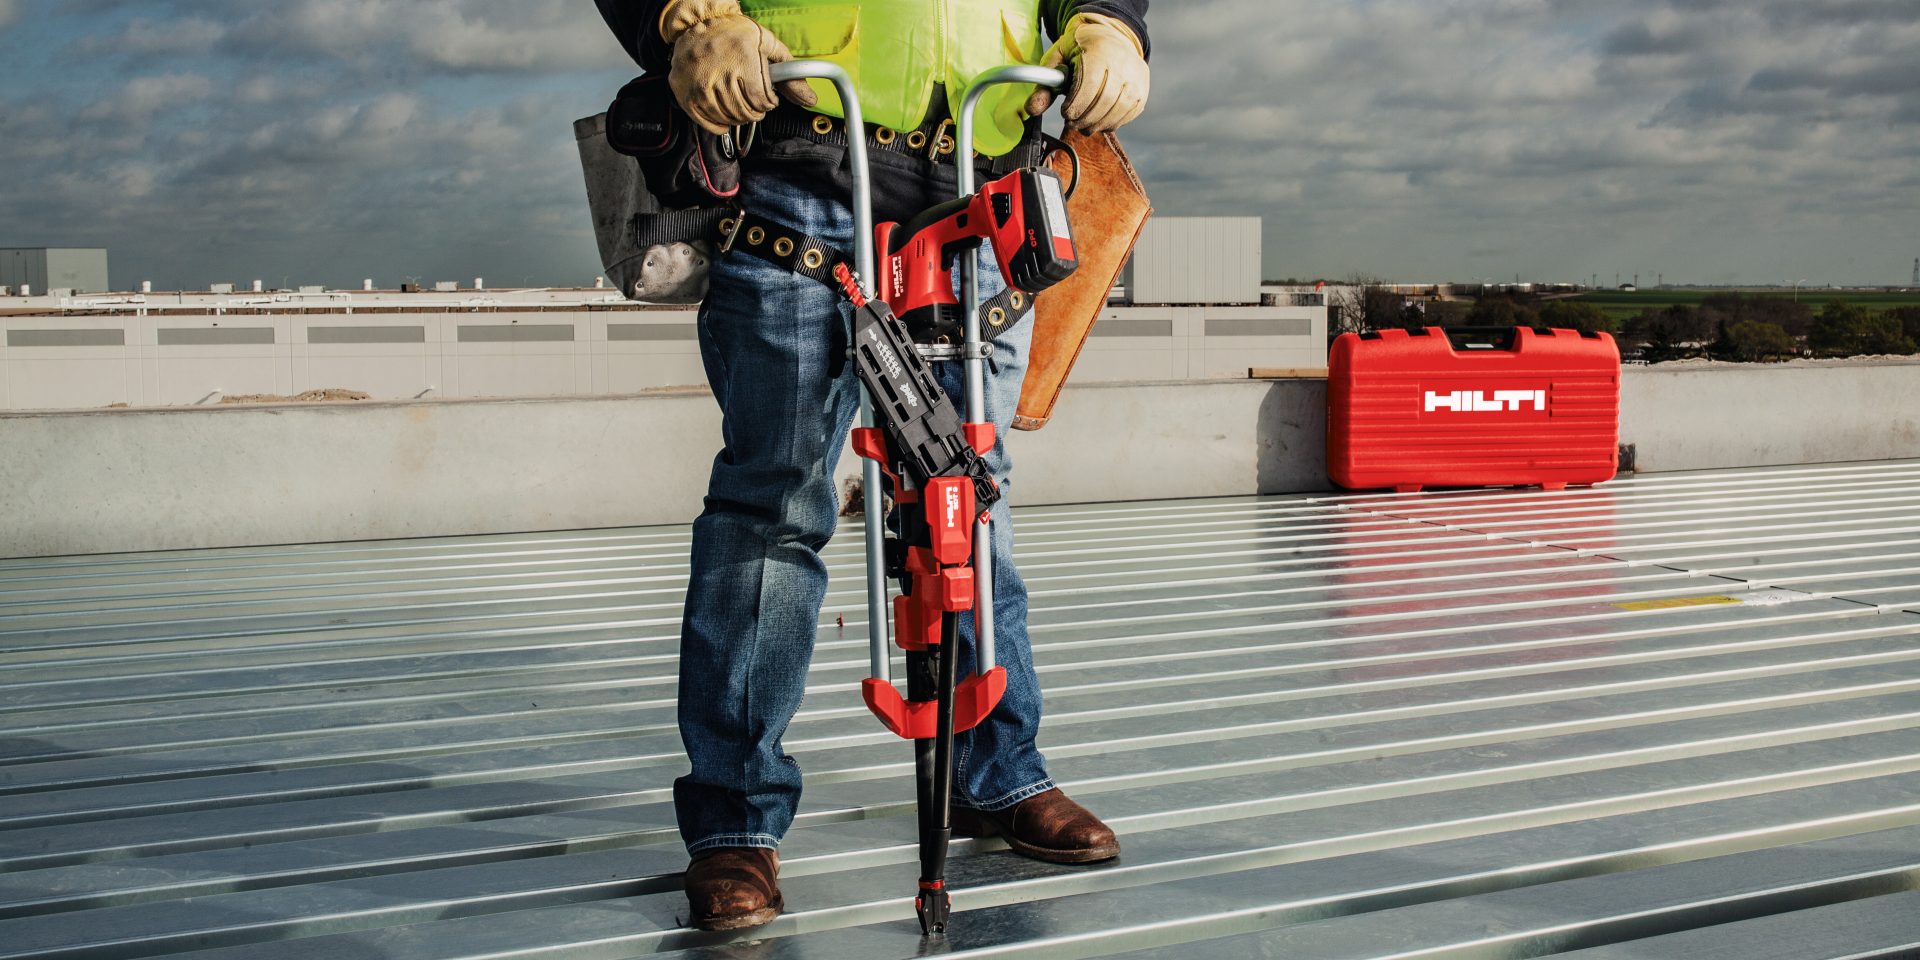 Operator on the metal deck using the Hilti screw fastening system (SDT Stand-up handle) to fasten down the deck